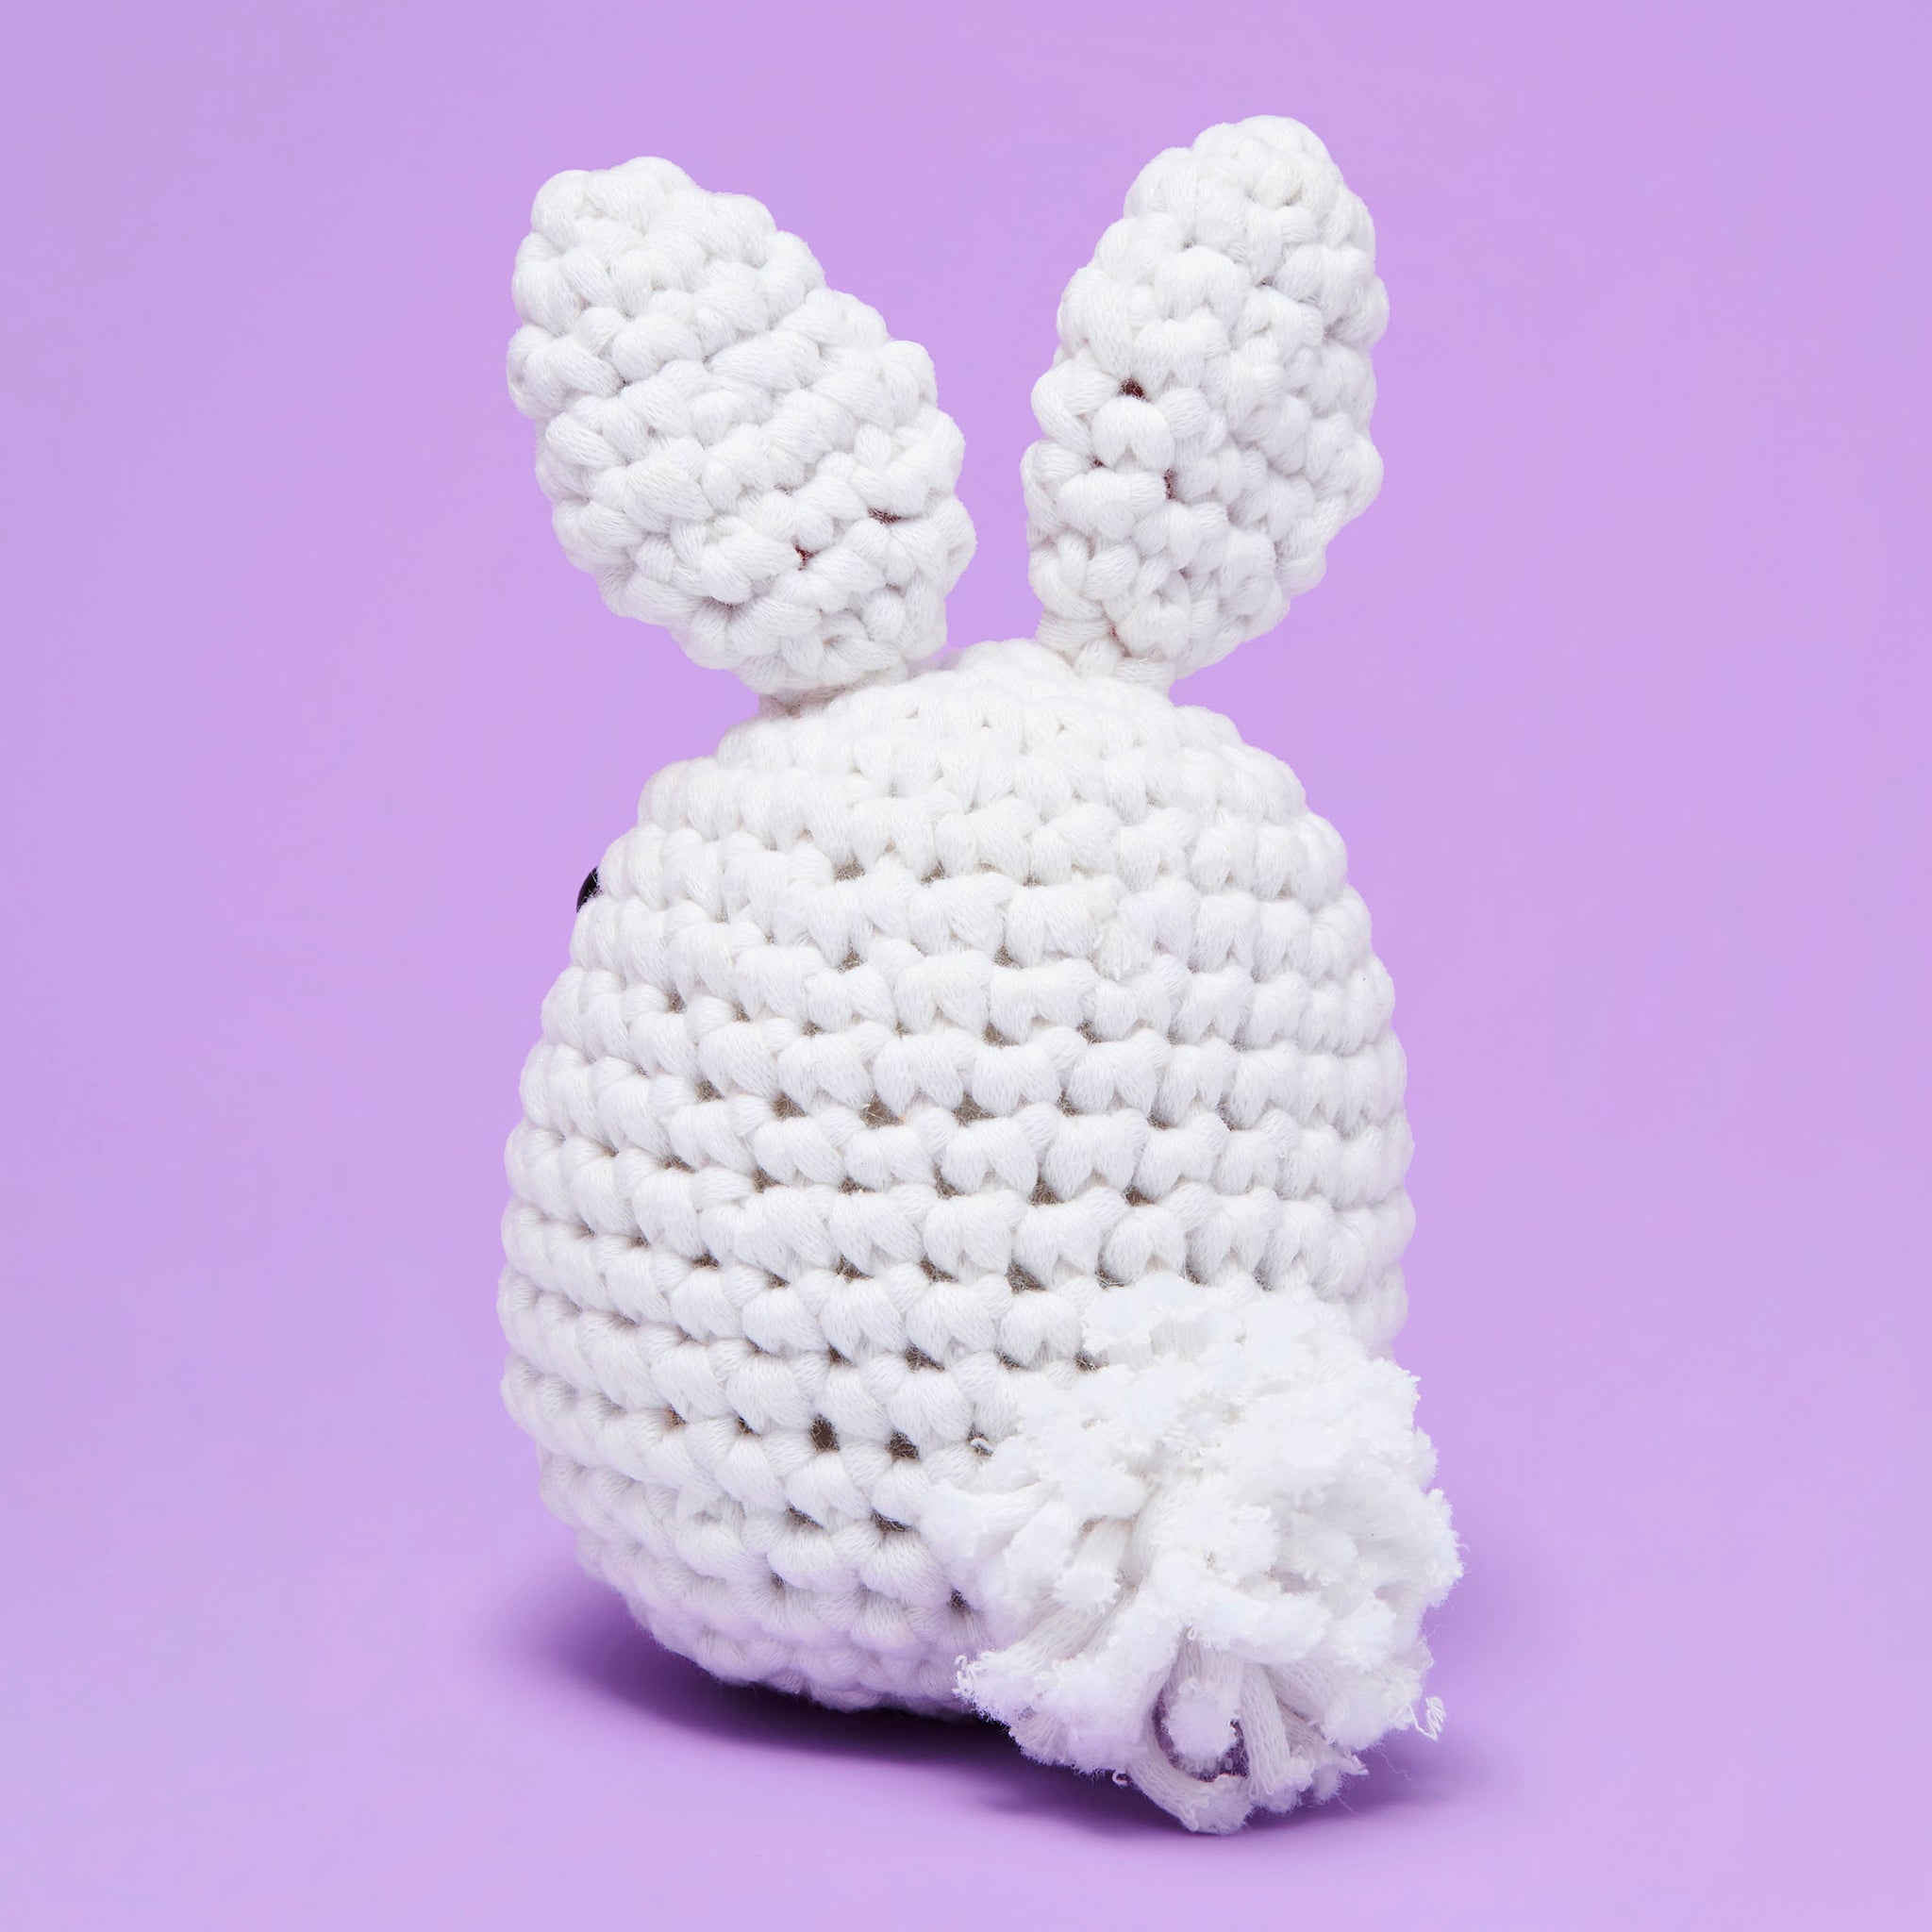 Kids Can Crochet Miffy the Bunny with New Woobles Kits - The Toy Insider